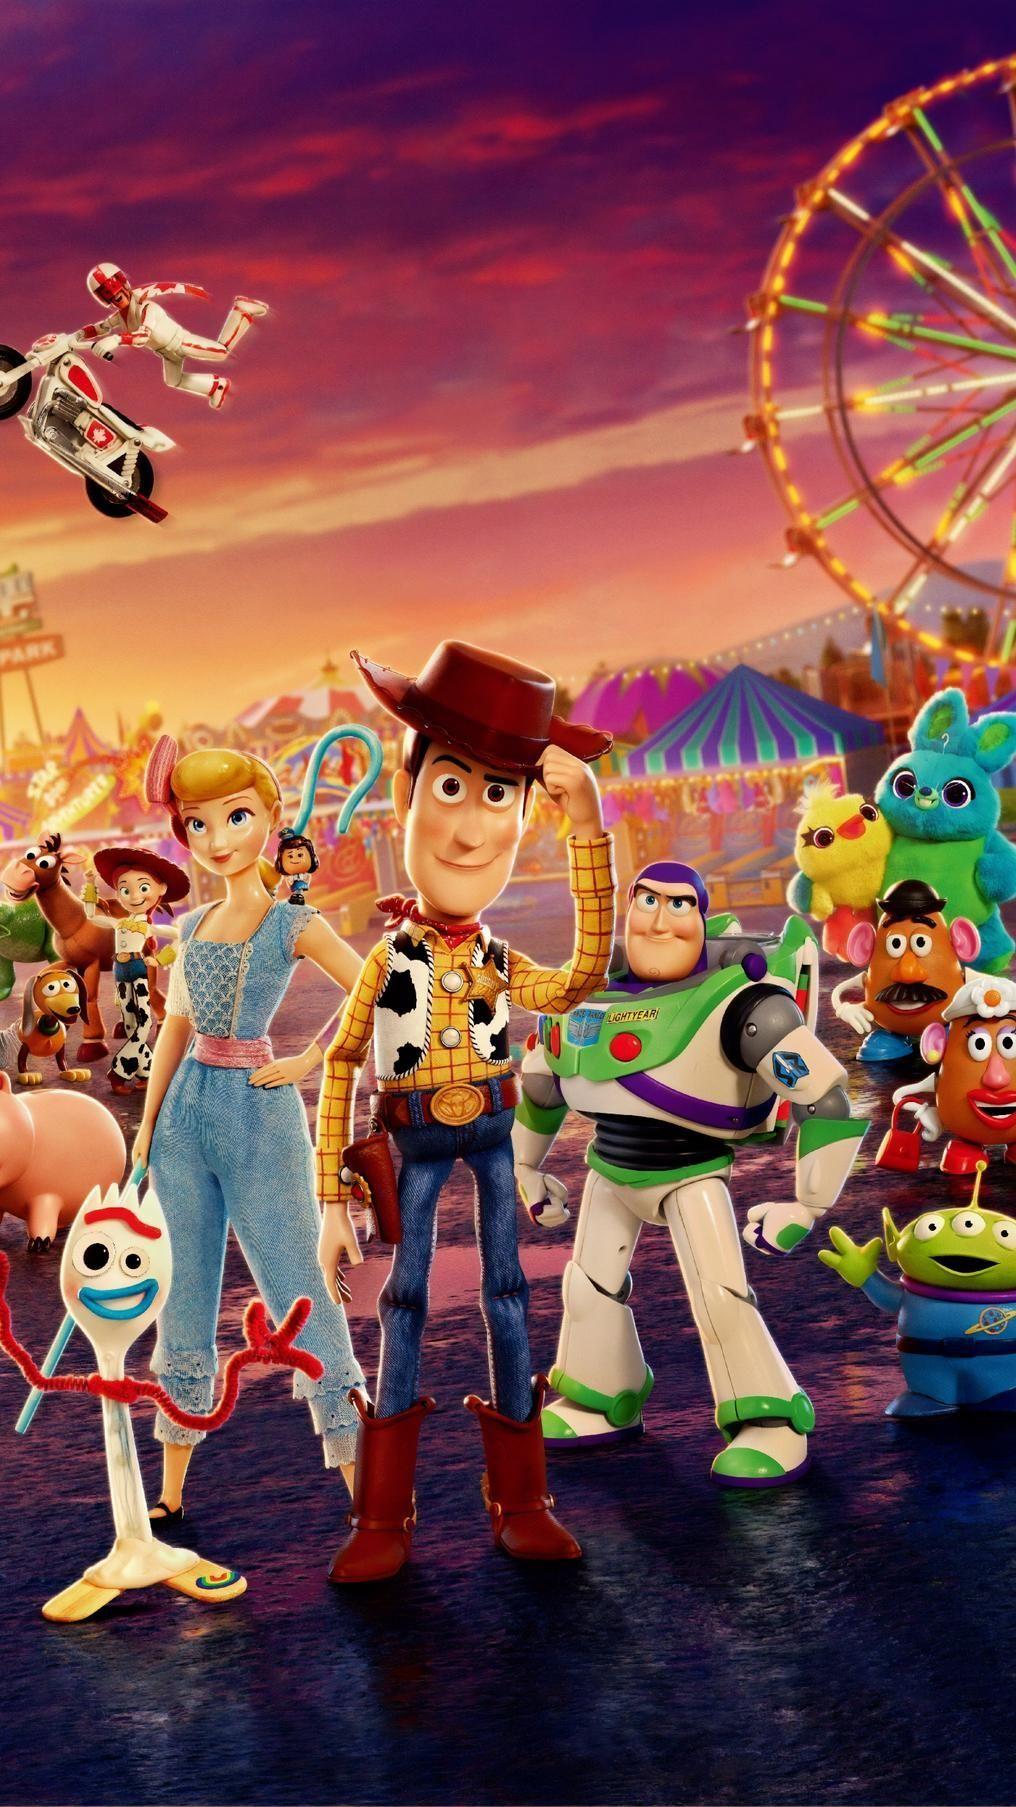 Toy Story 4 Wallpaper Free Toy Story 4 Background